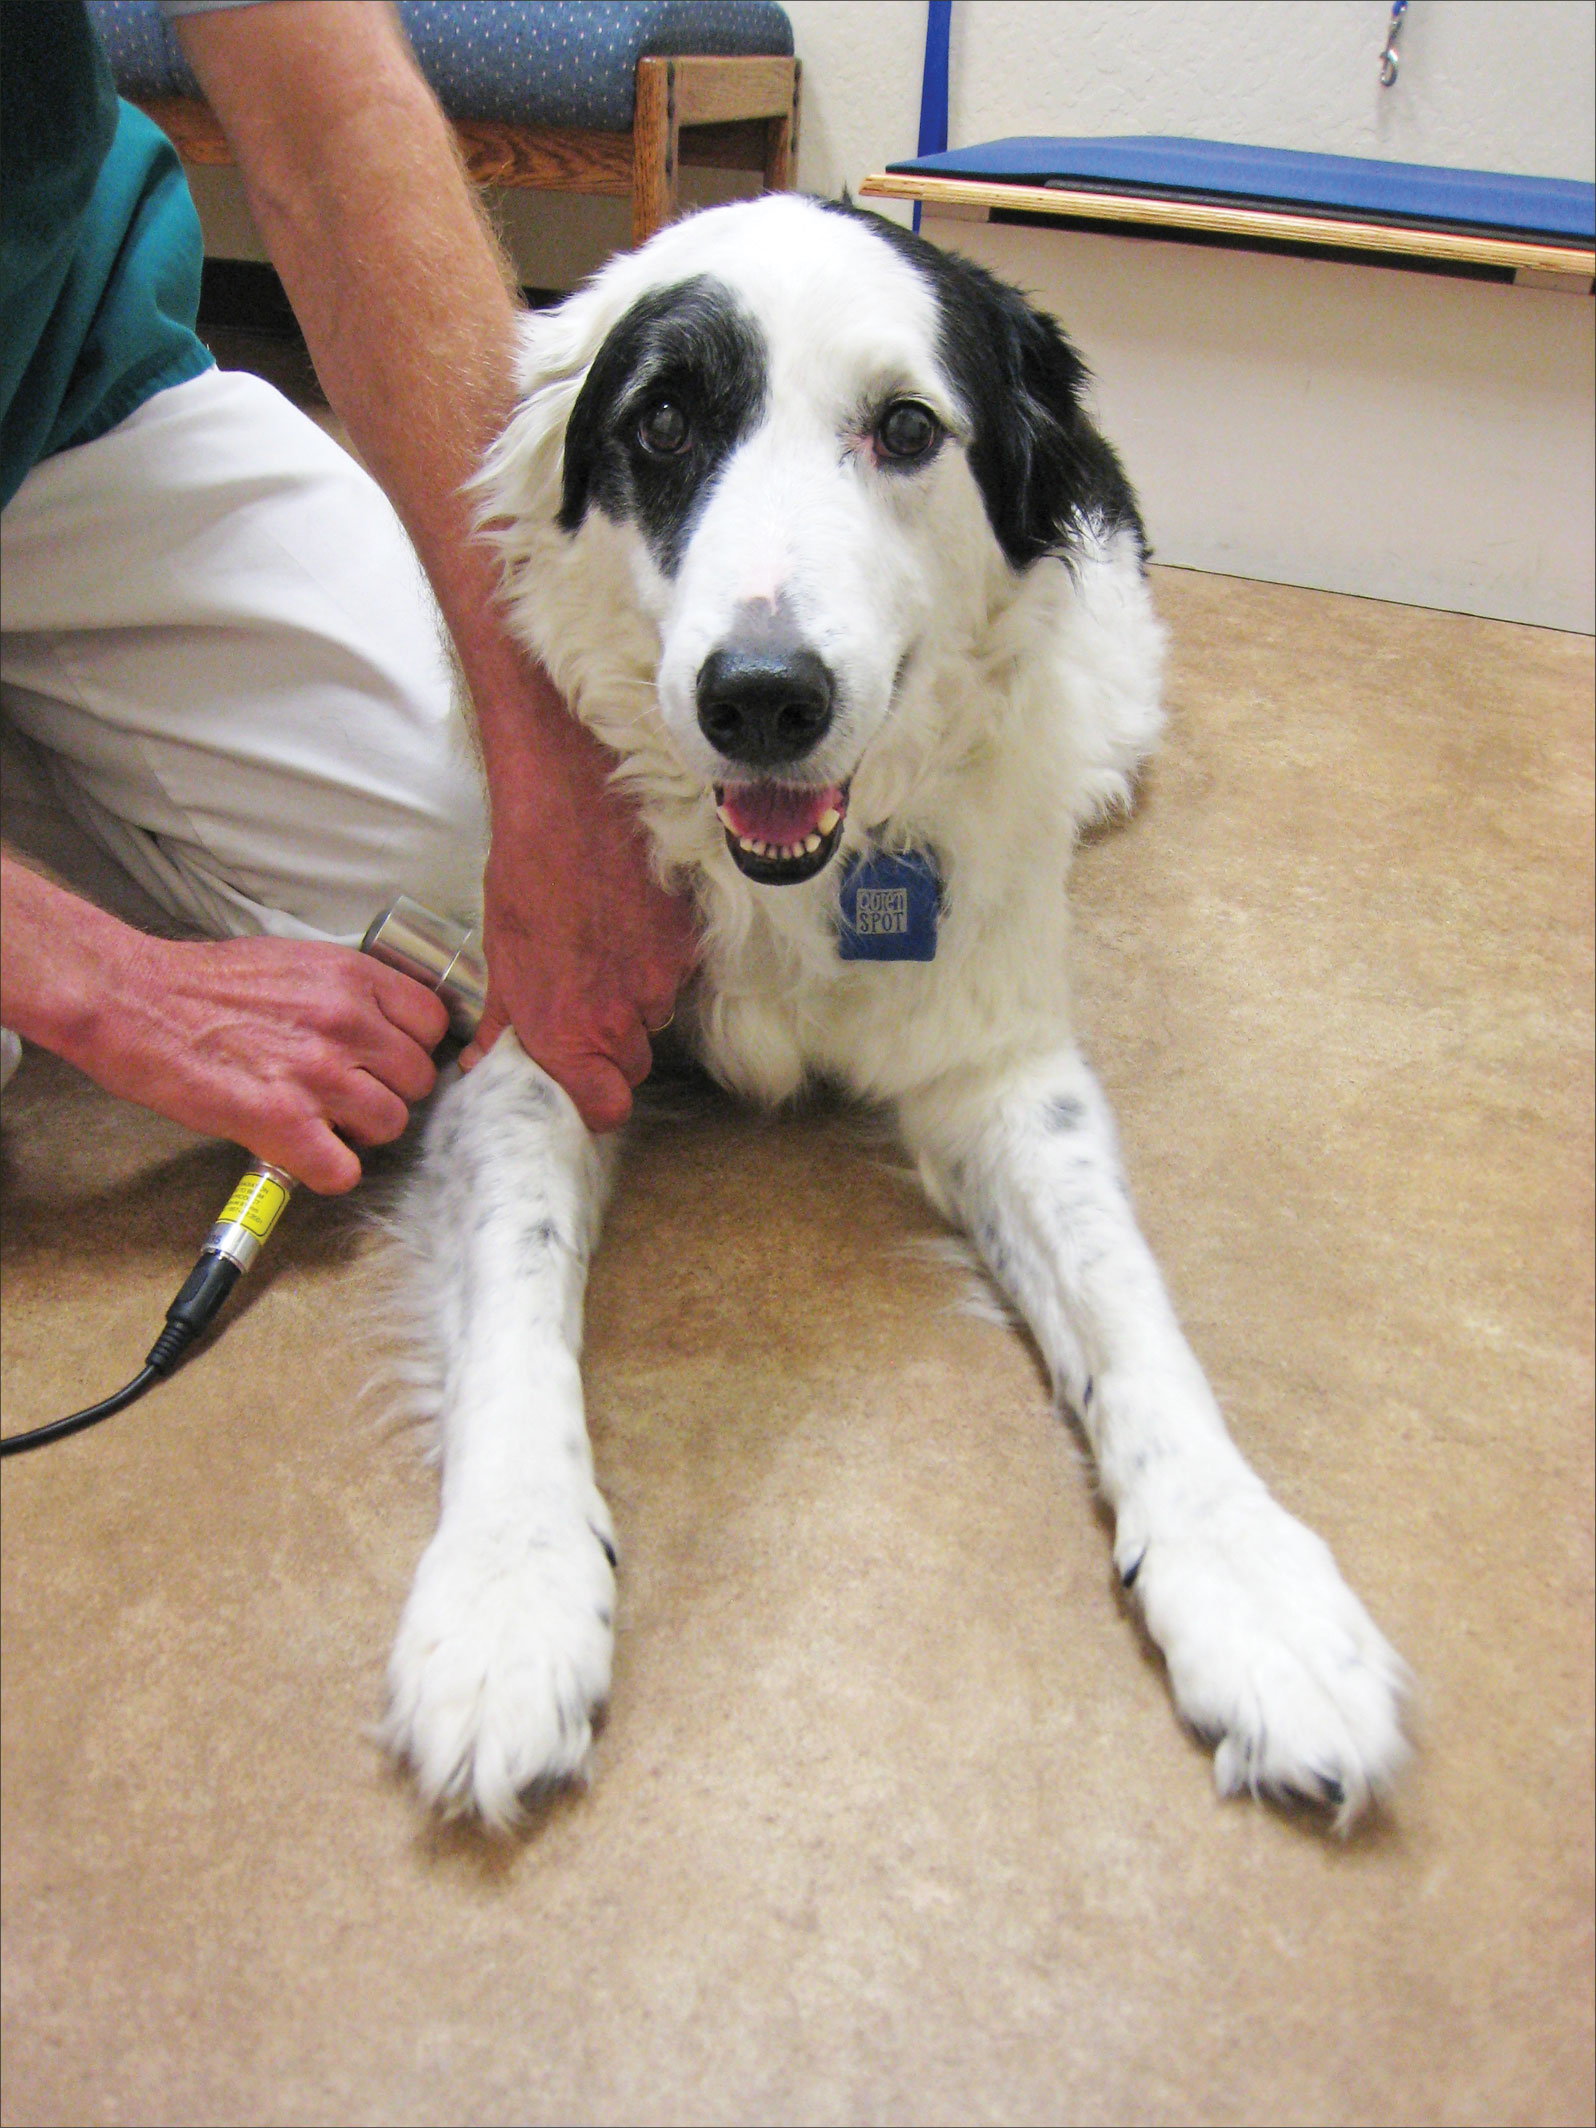 Consider Light Therapy For Your Dog's Rehab - Whole Dog Journal